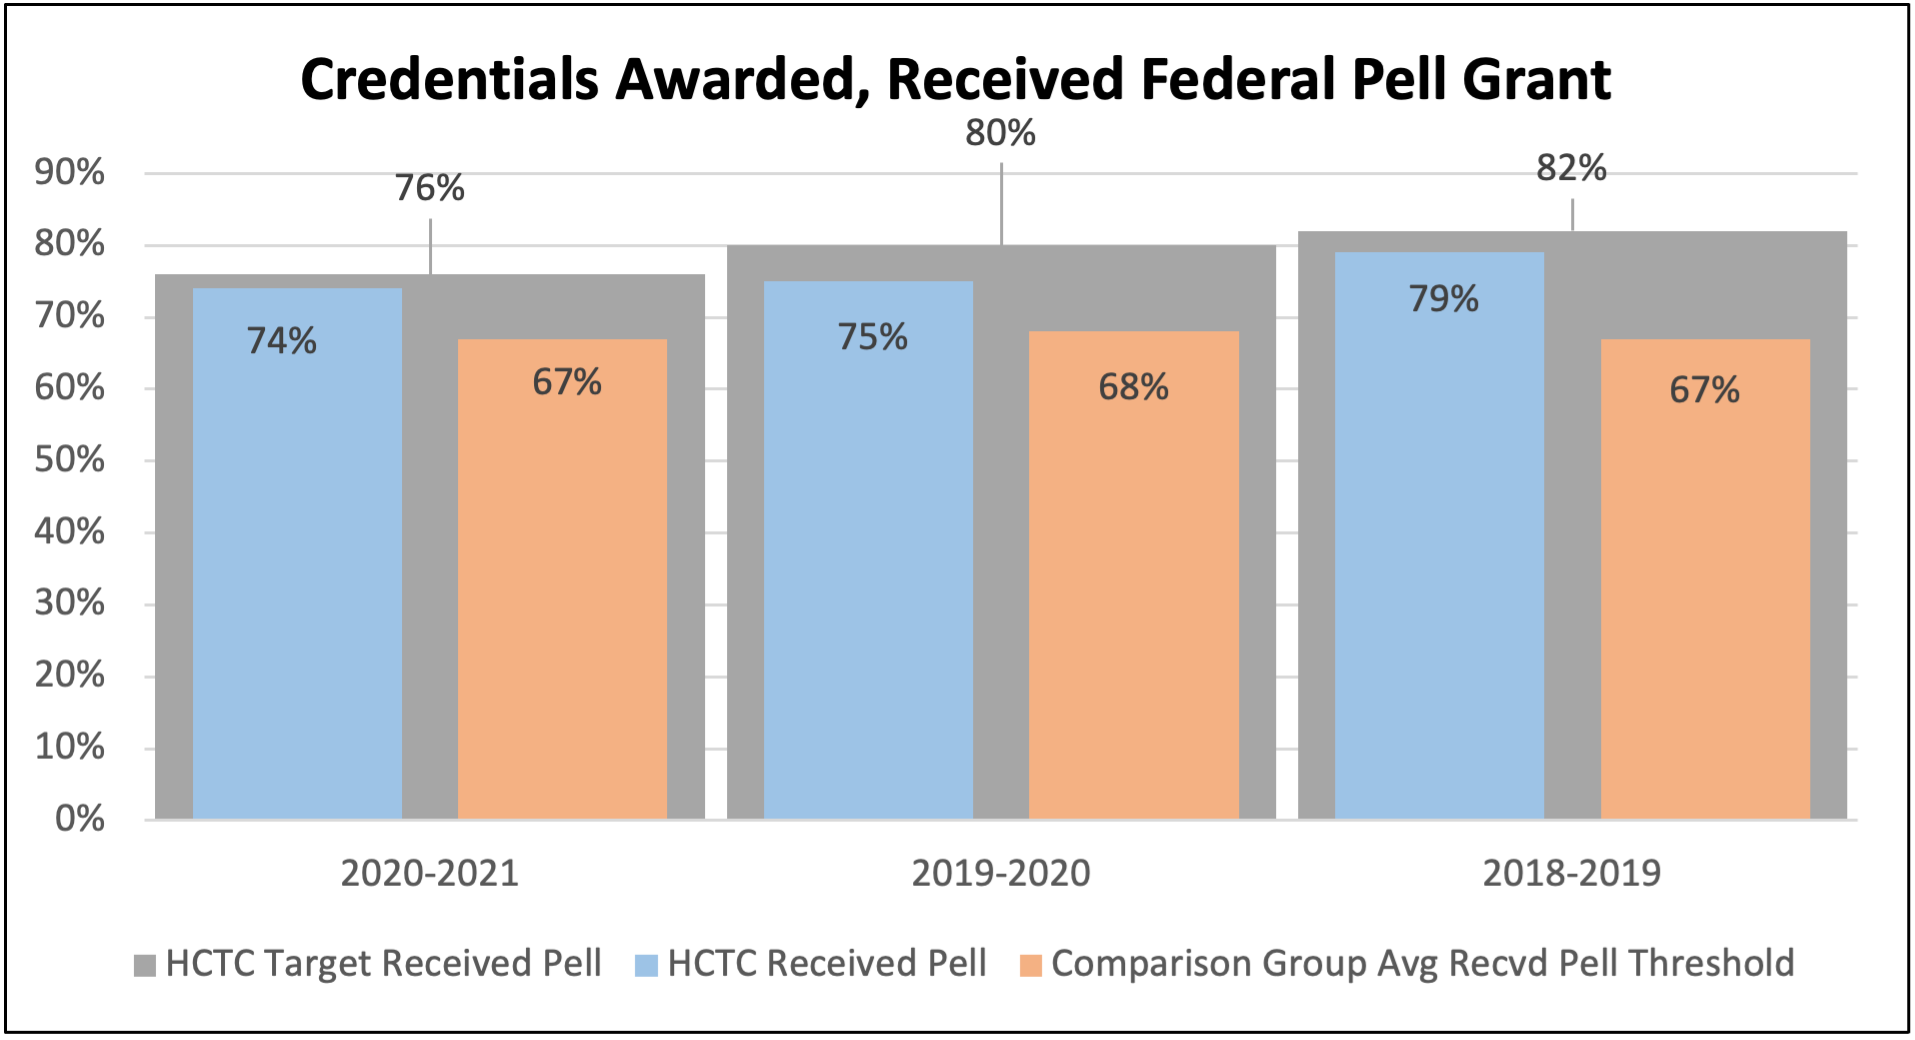 Credentials Awarded Received Federal Pell Grant vs. Did Not Receive Federal Pell Grant: Measured by the total number of credentials (degrees, diplomas, and certificates) awarded for the academic year disaggregated by students who received a federal Pell grant vs. students who did not receive a federal Pell grant.  HCTC's threshold is to meet or exceed the median total credentials awarded--Received federal Pell grant vs. Did Not Receive federal Pell grant for its comparison groups.